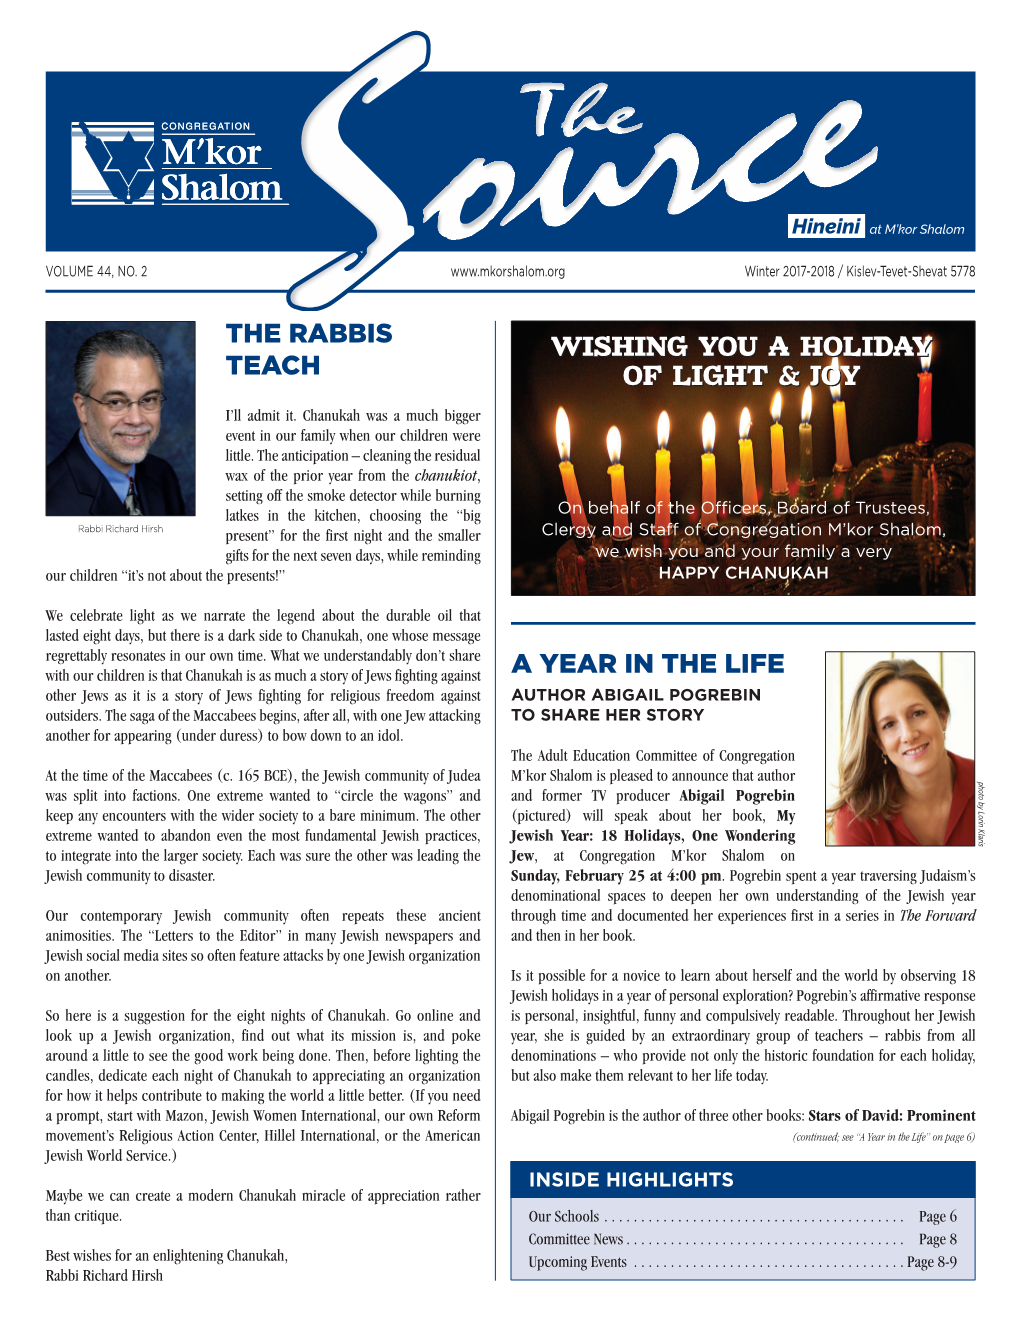 The Rabbis Teach a Year in the Life Wishing You a Holiday Of